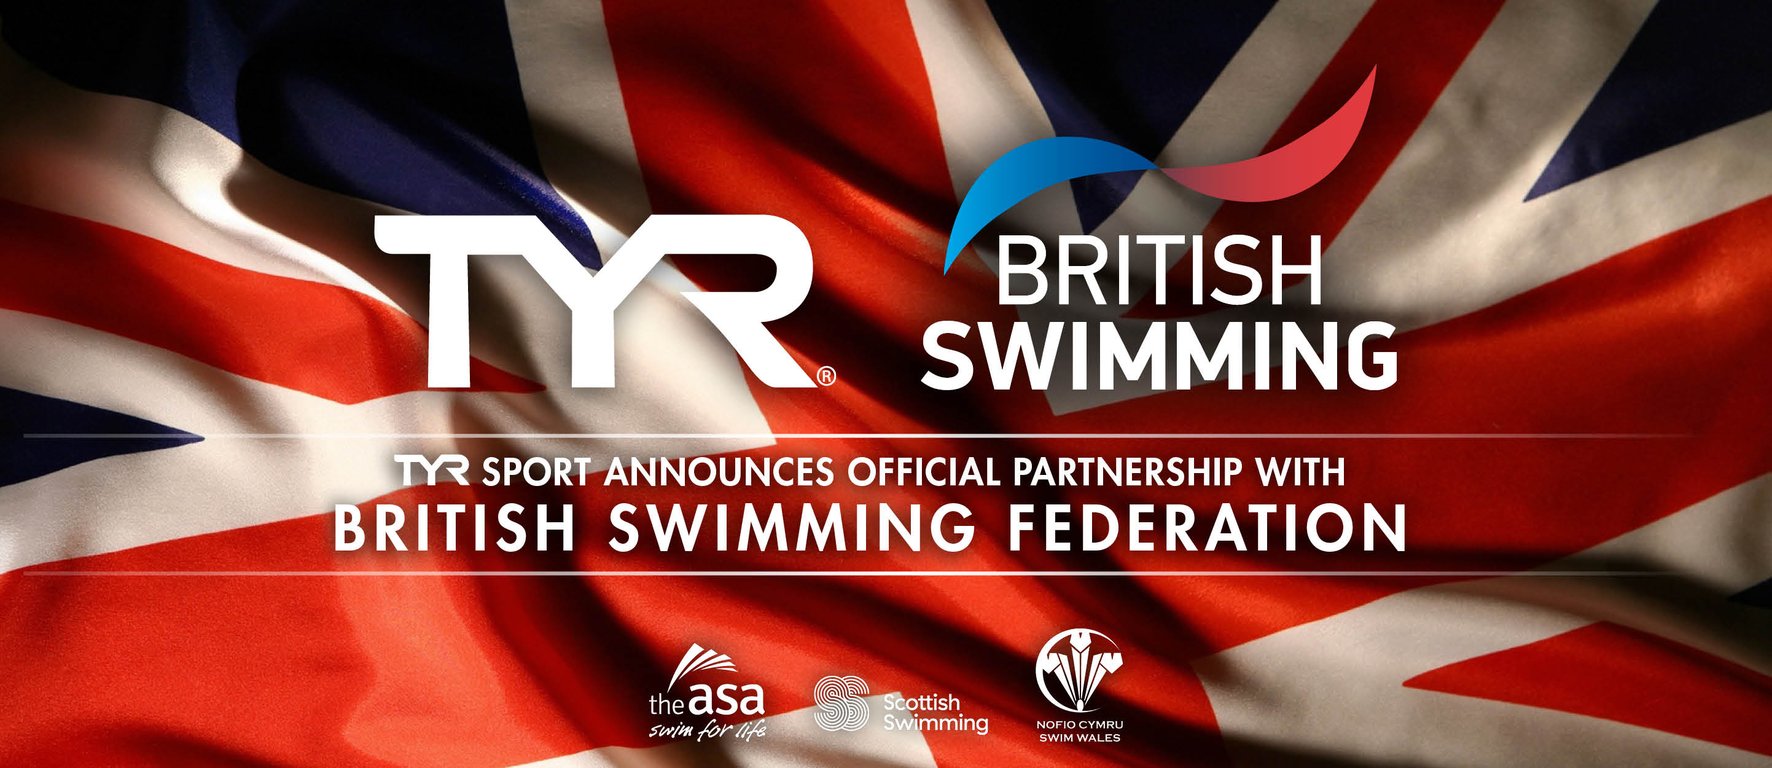 TYR SPORT ANNOUNCES OFFICIAL SPONSORSHIP OF USA SWIMMING